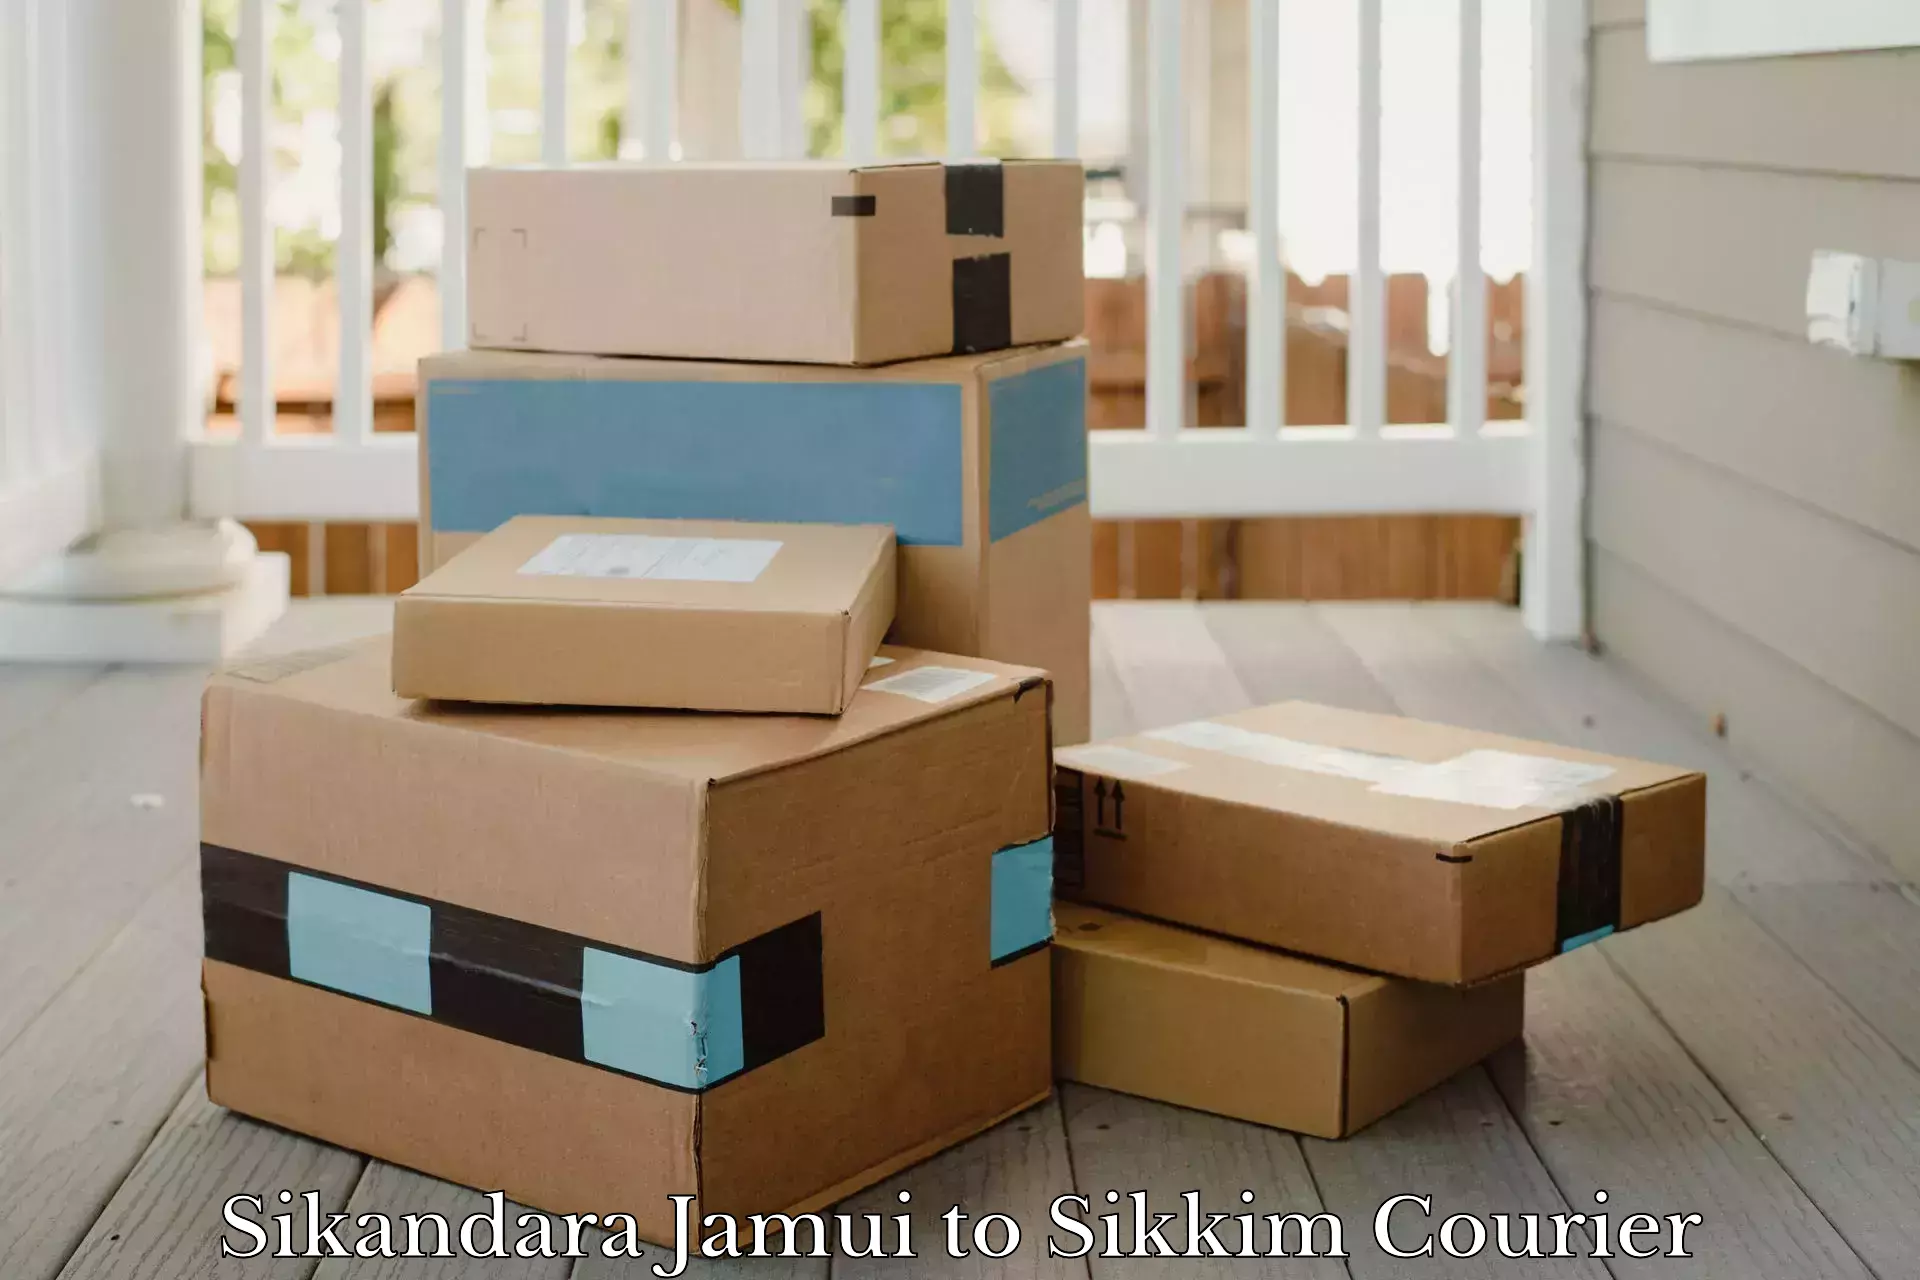 On-time delivery services Sikandara Jamui to Pelling